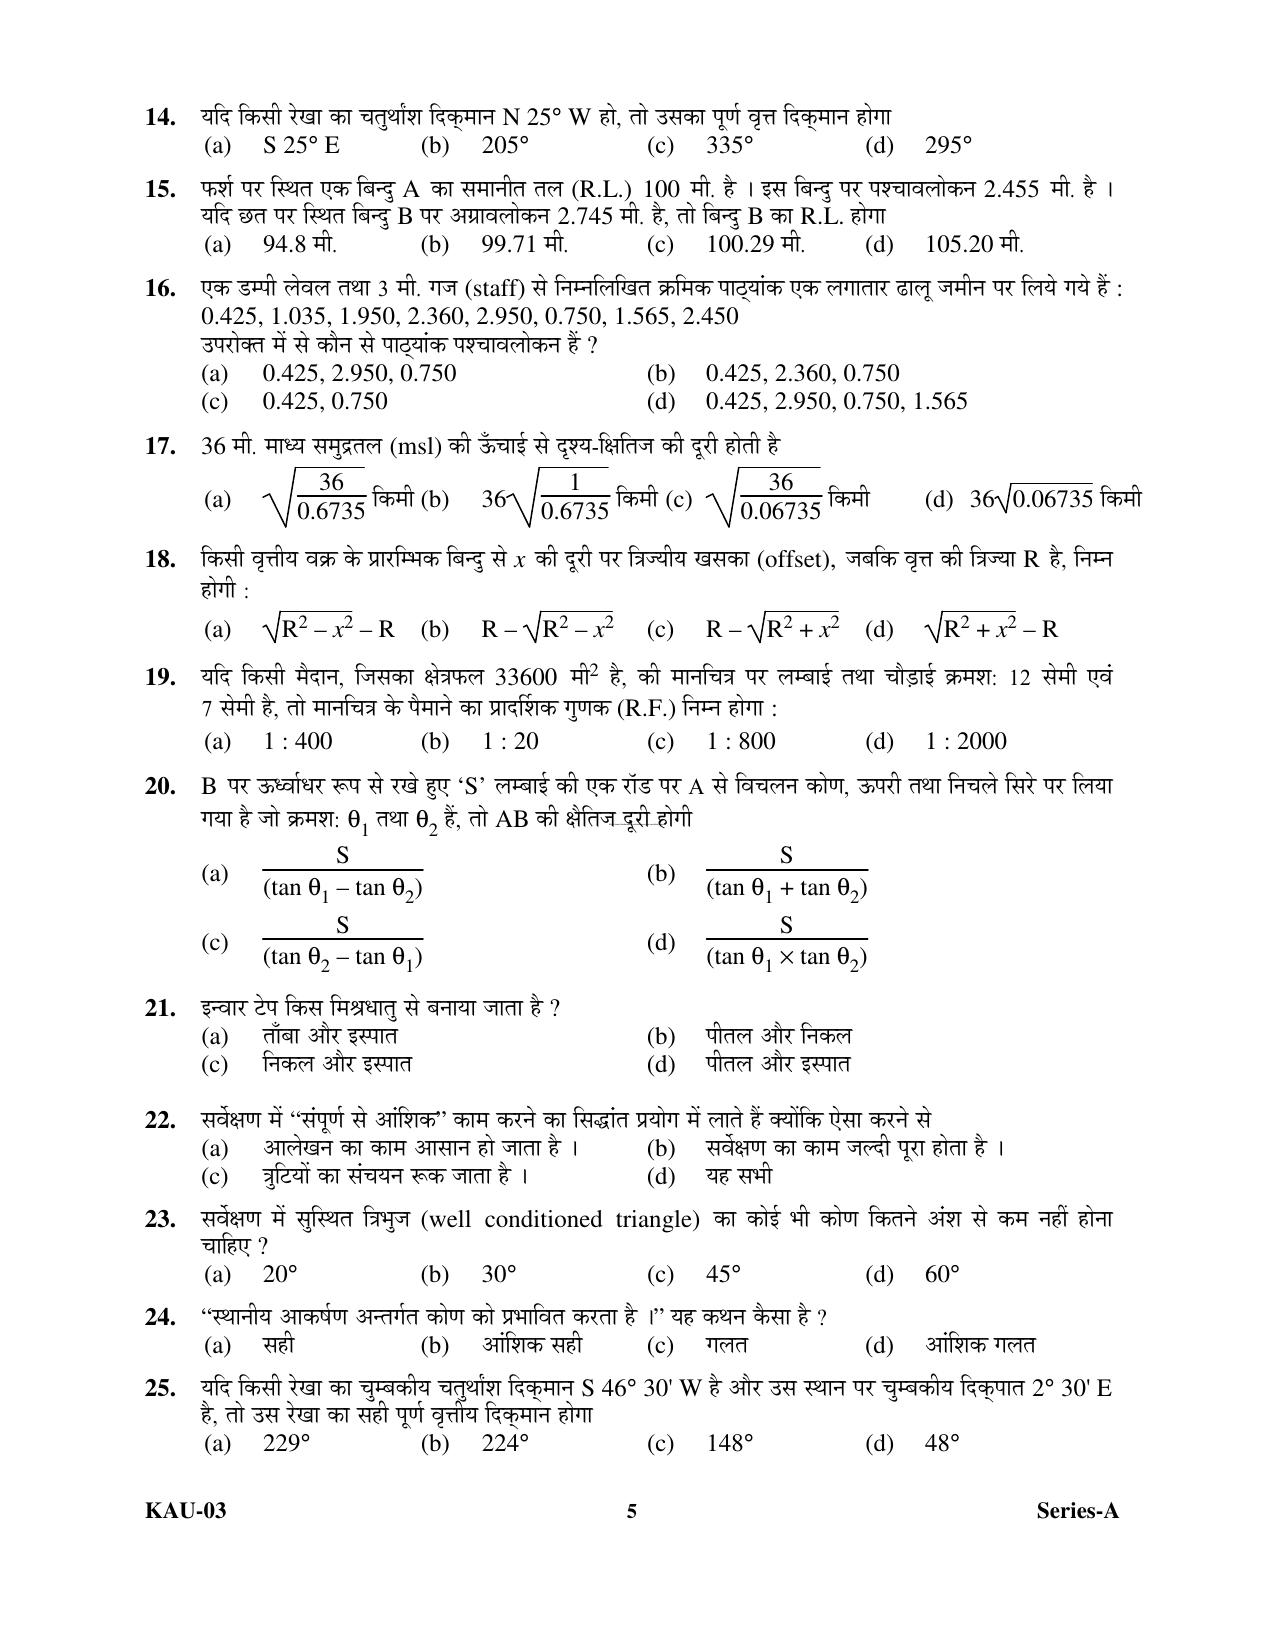 SEBI Officer Civil Engineering Previous Paper - Page 4